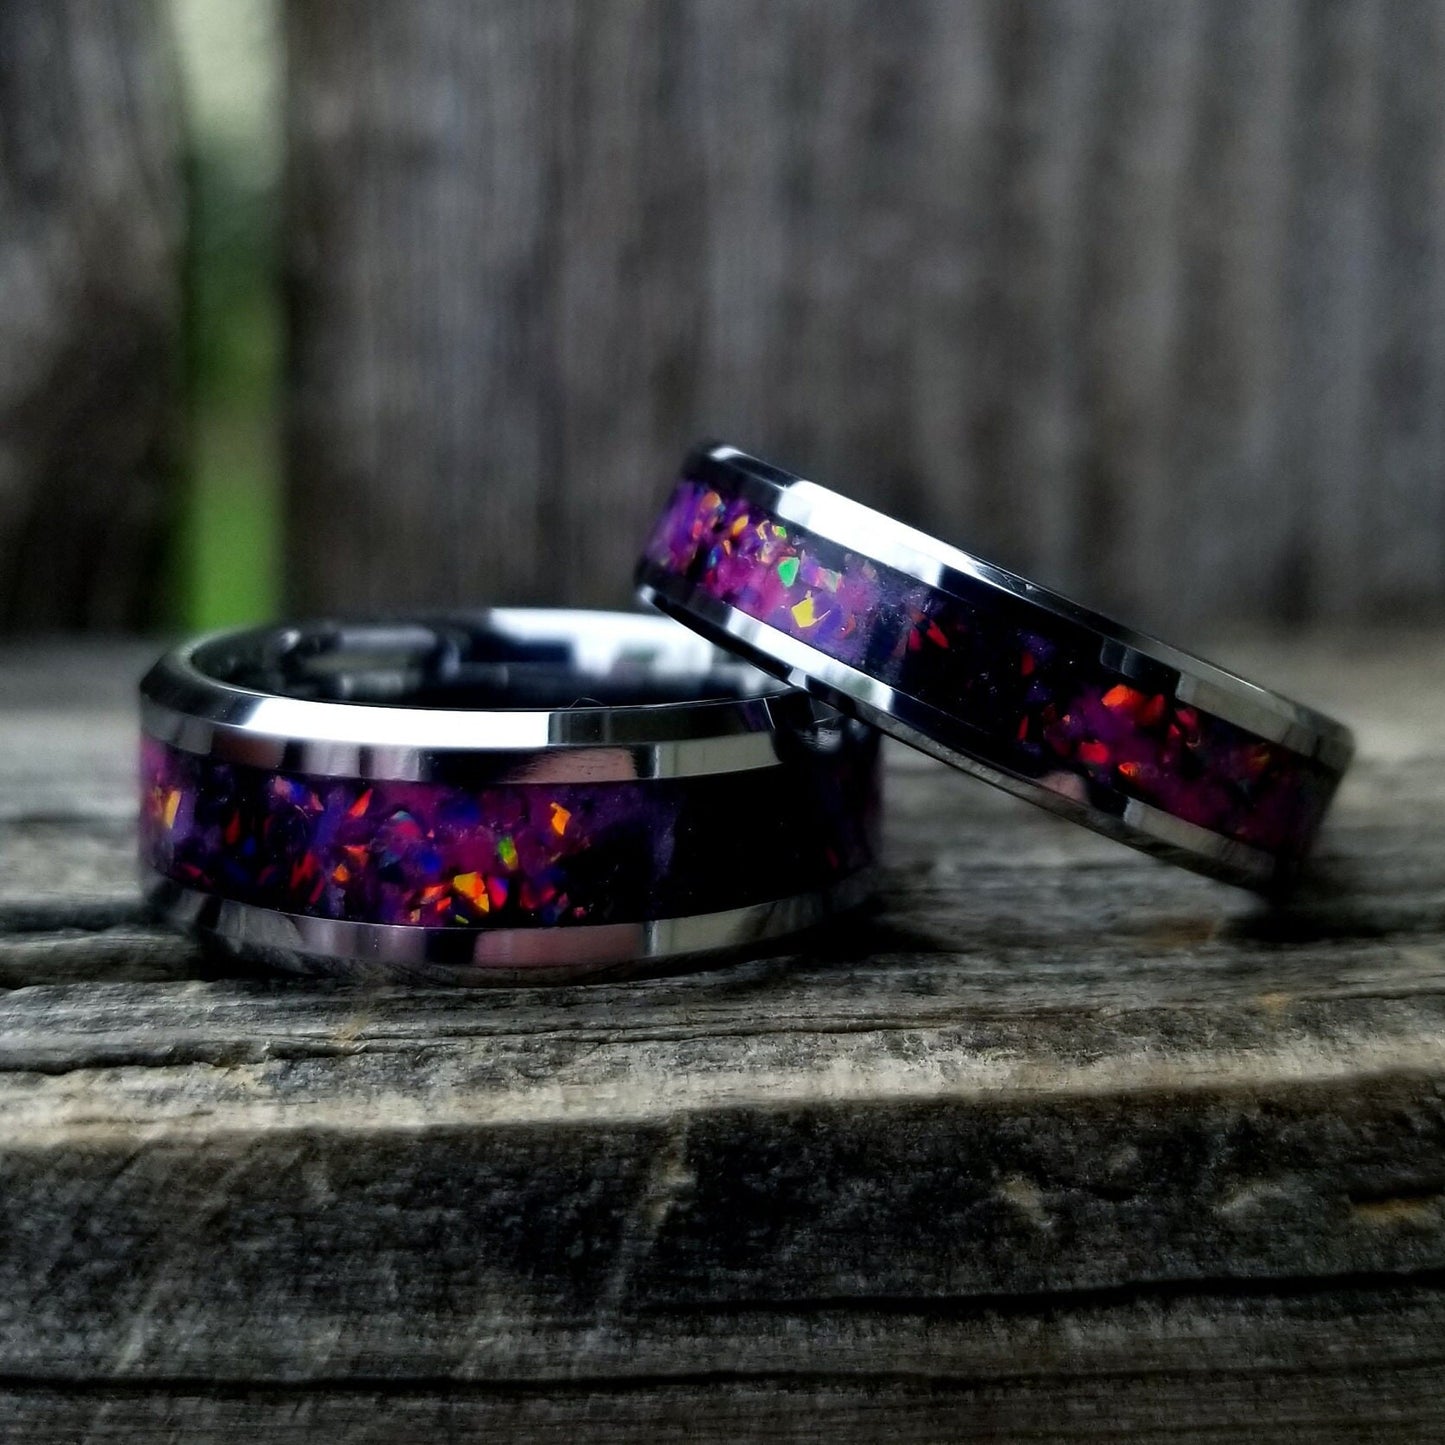 Tungsten carbide galaxy opal glow ring with ruby red and black fire opal inlay. Tungsten glow ring. Men's ring. women's ring. Sizes 5-13